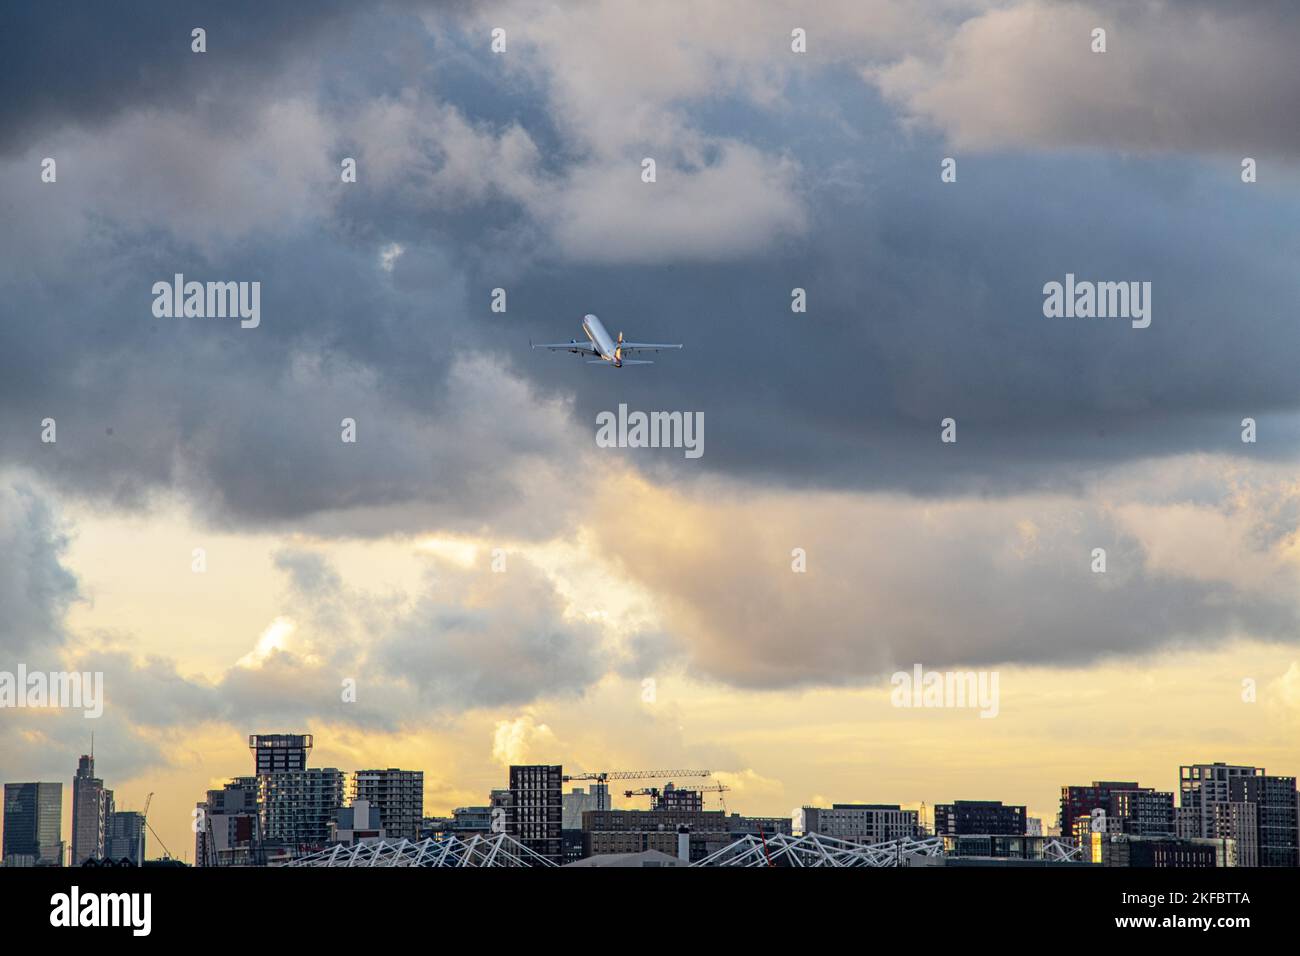 A British Airways Embraer ERJ-190 climbs steeply into stormy skies after take off from London City Airport. Stock Photo